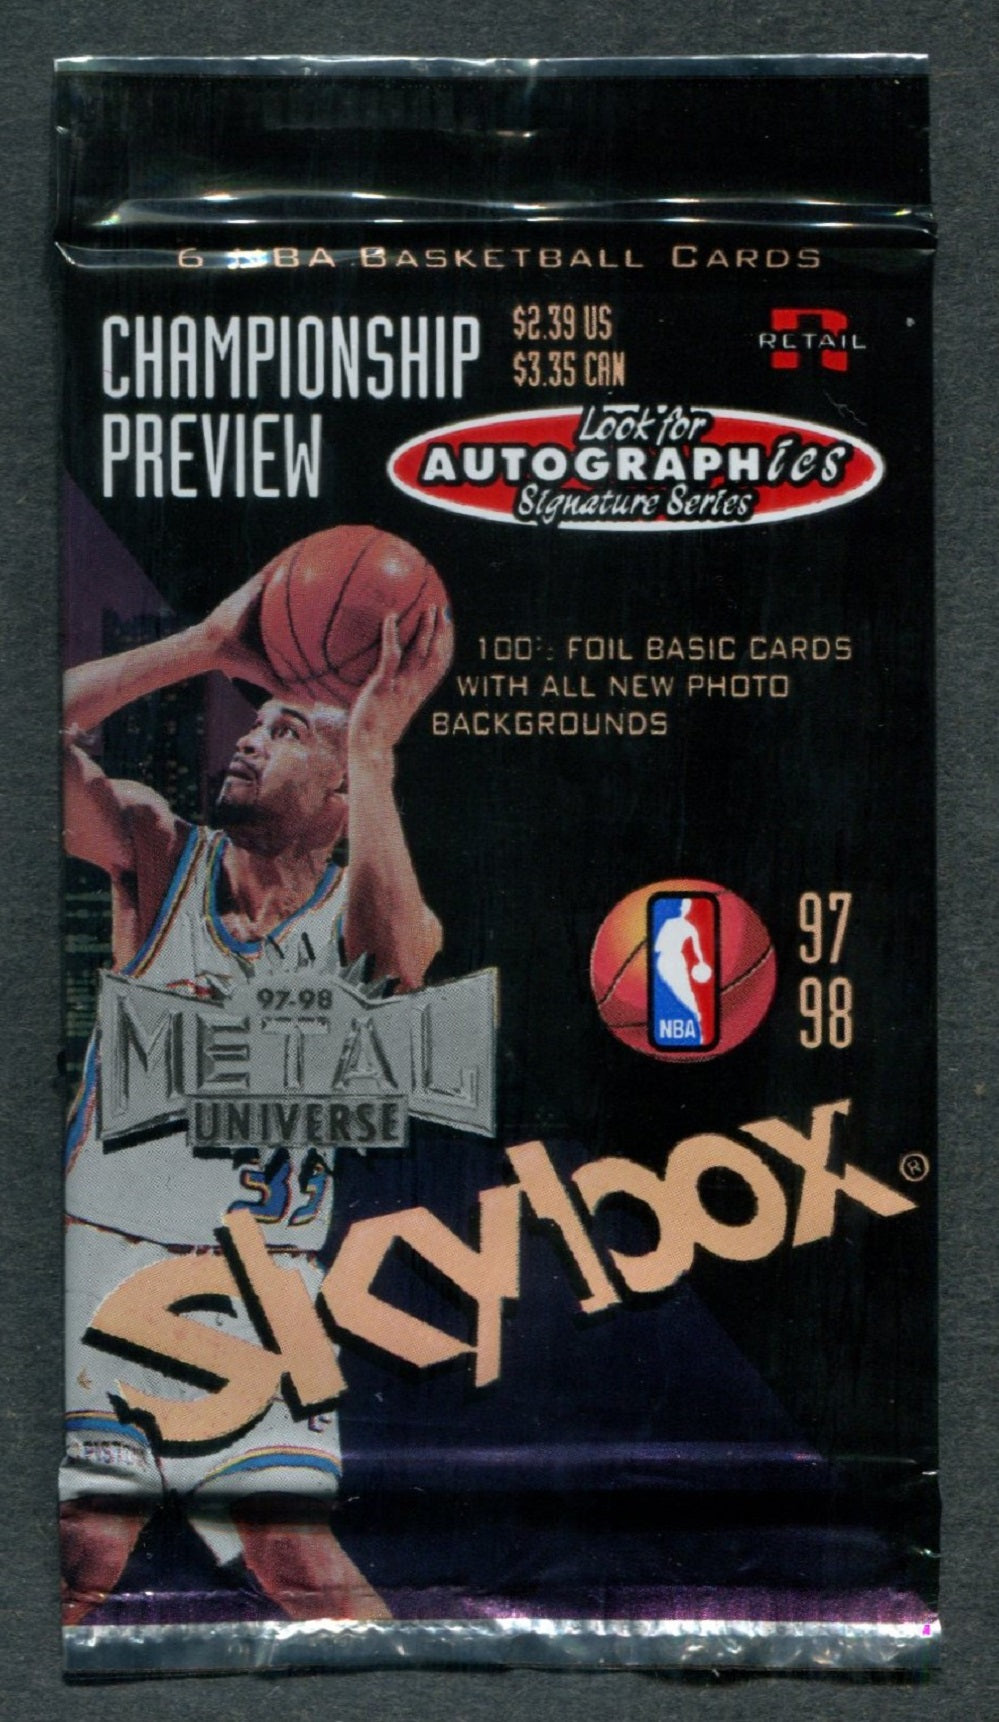 1997/98 Skybox Metal Universe Series 2 Championship Preview  Unopened Pack (Retail)